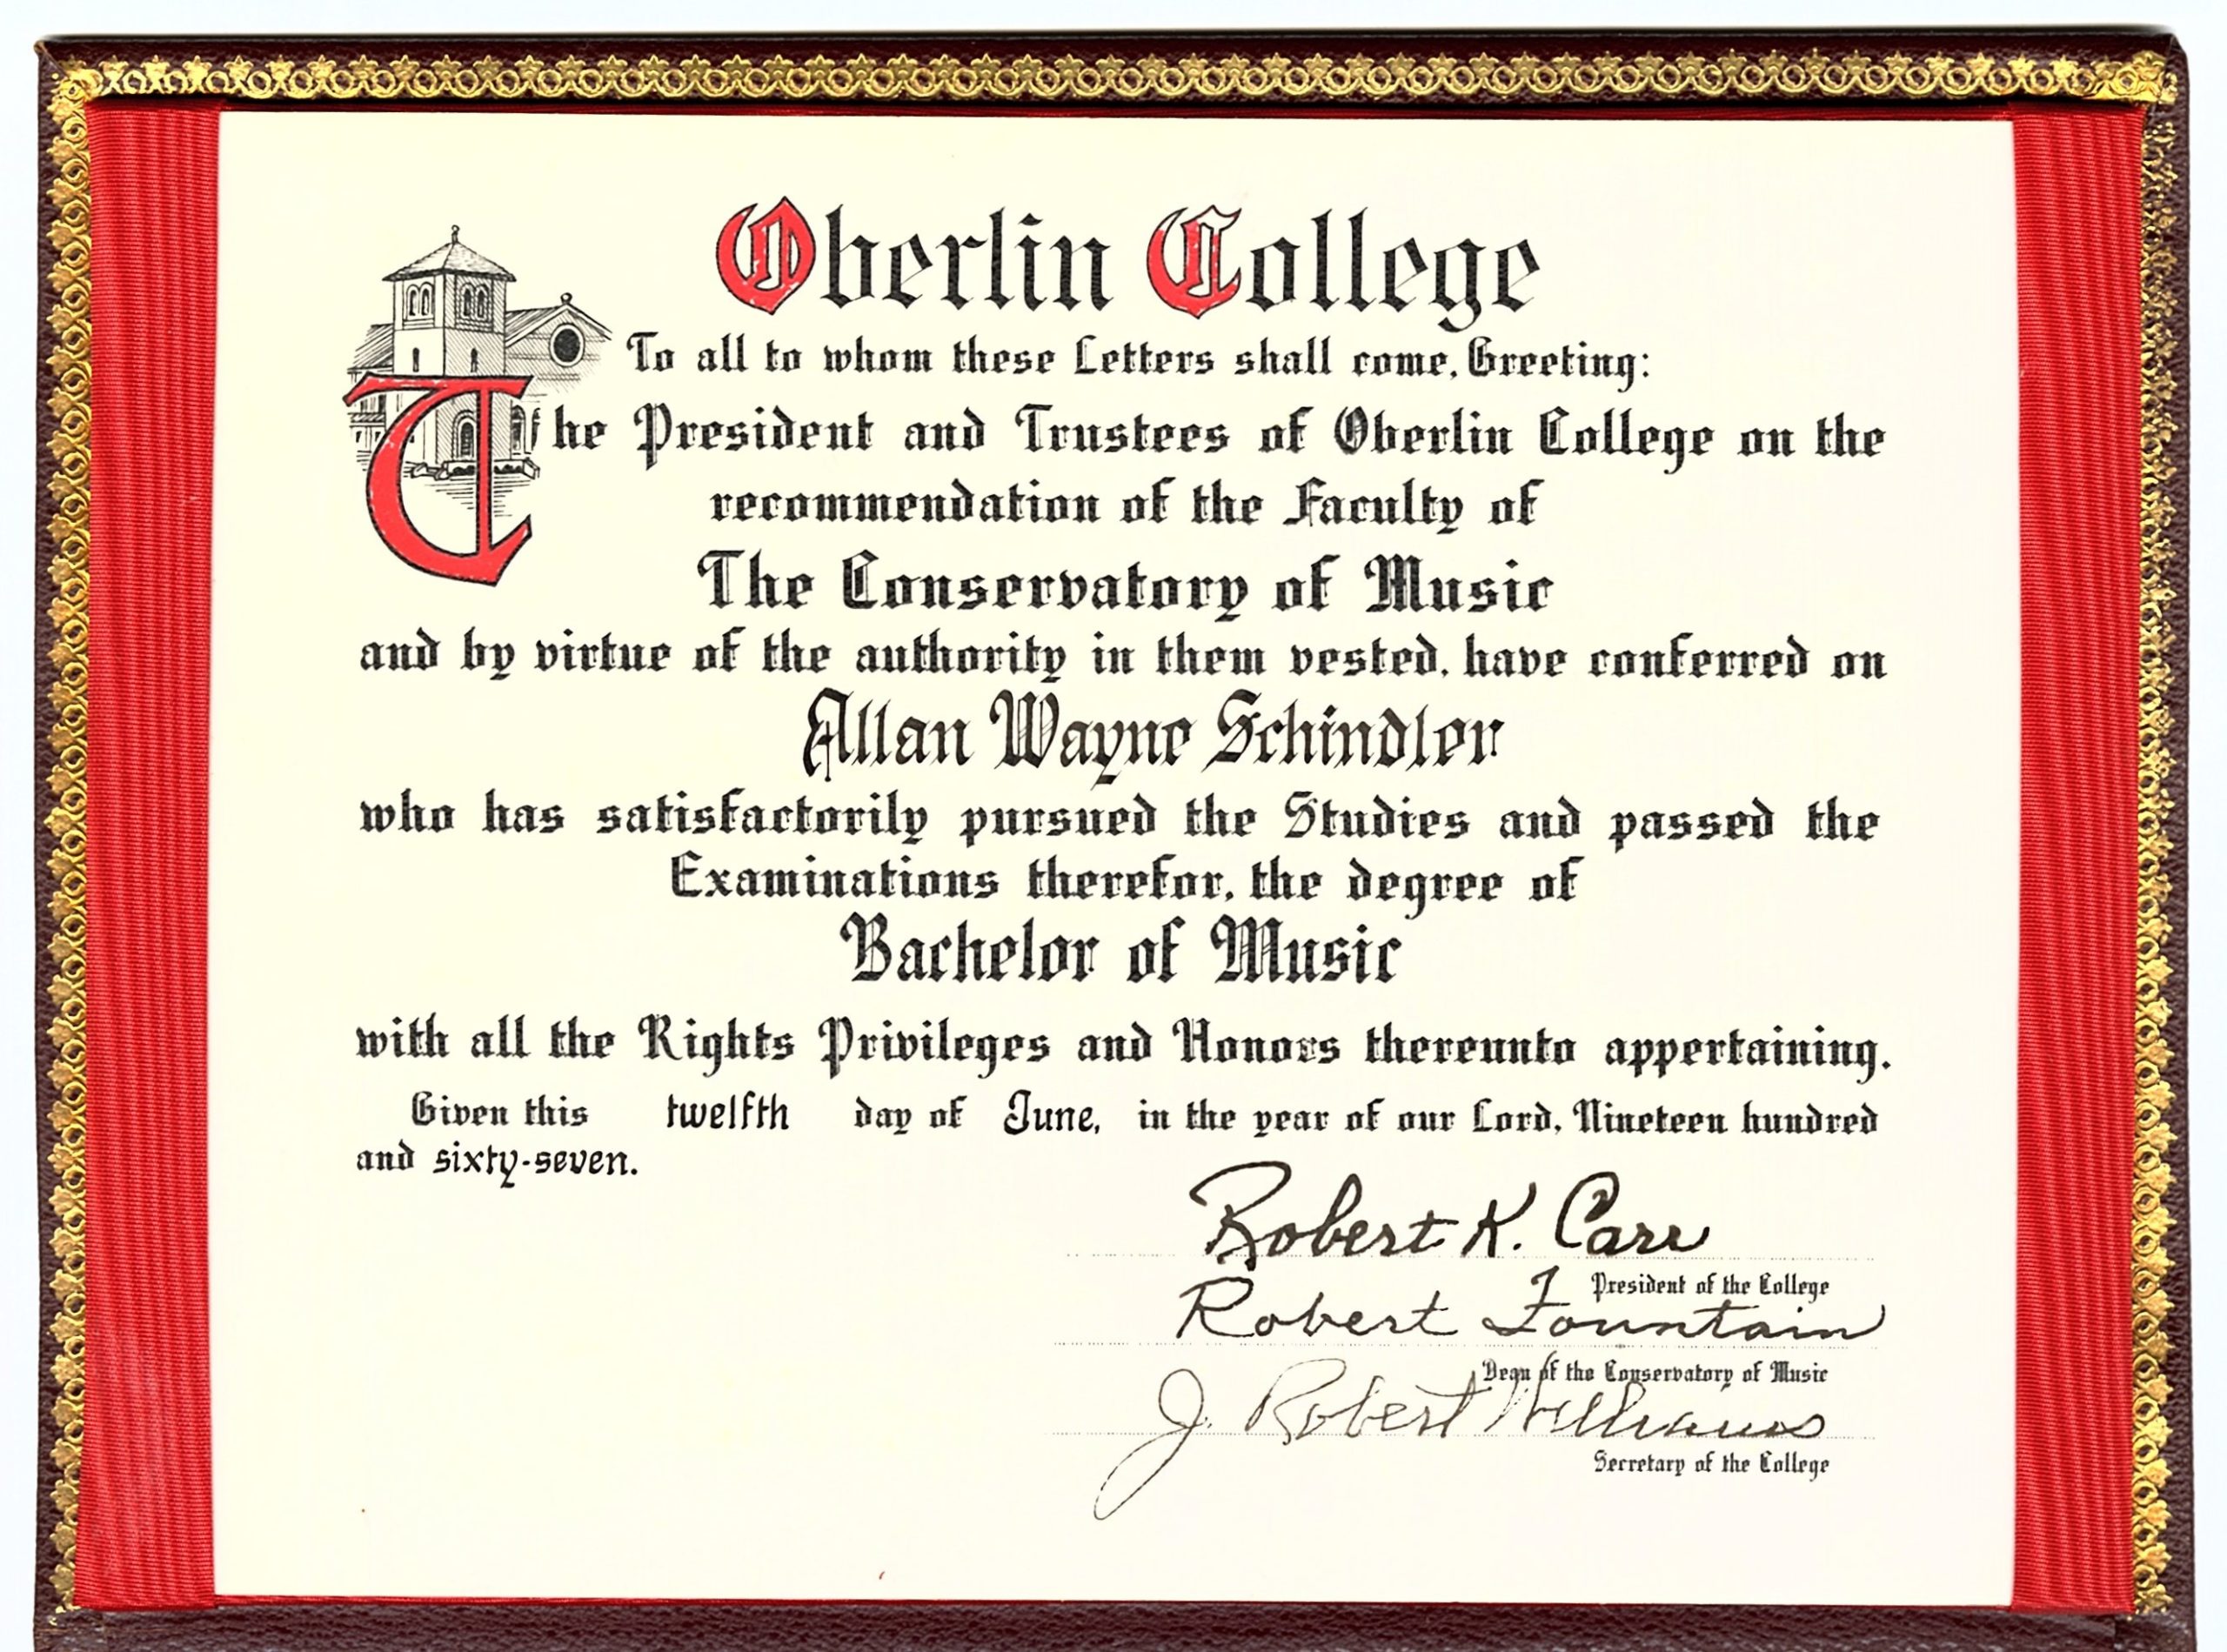 Bachelor of Music diploma, Oberlin College (June 1967)